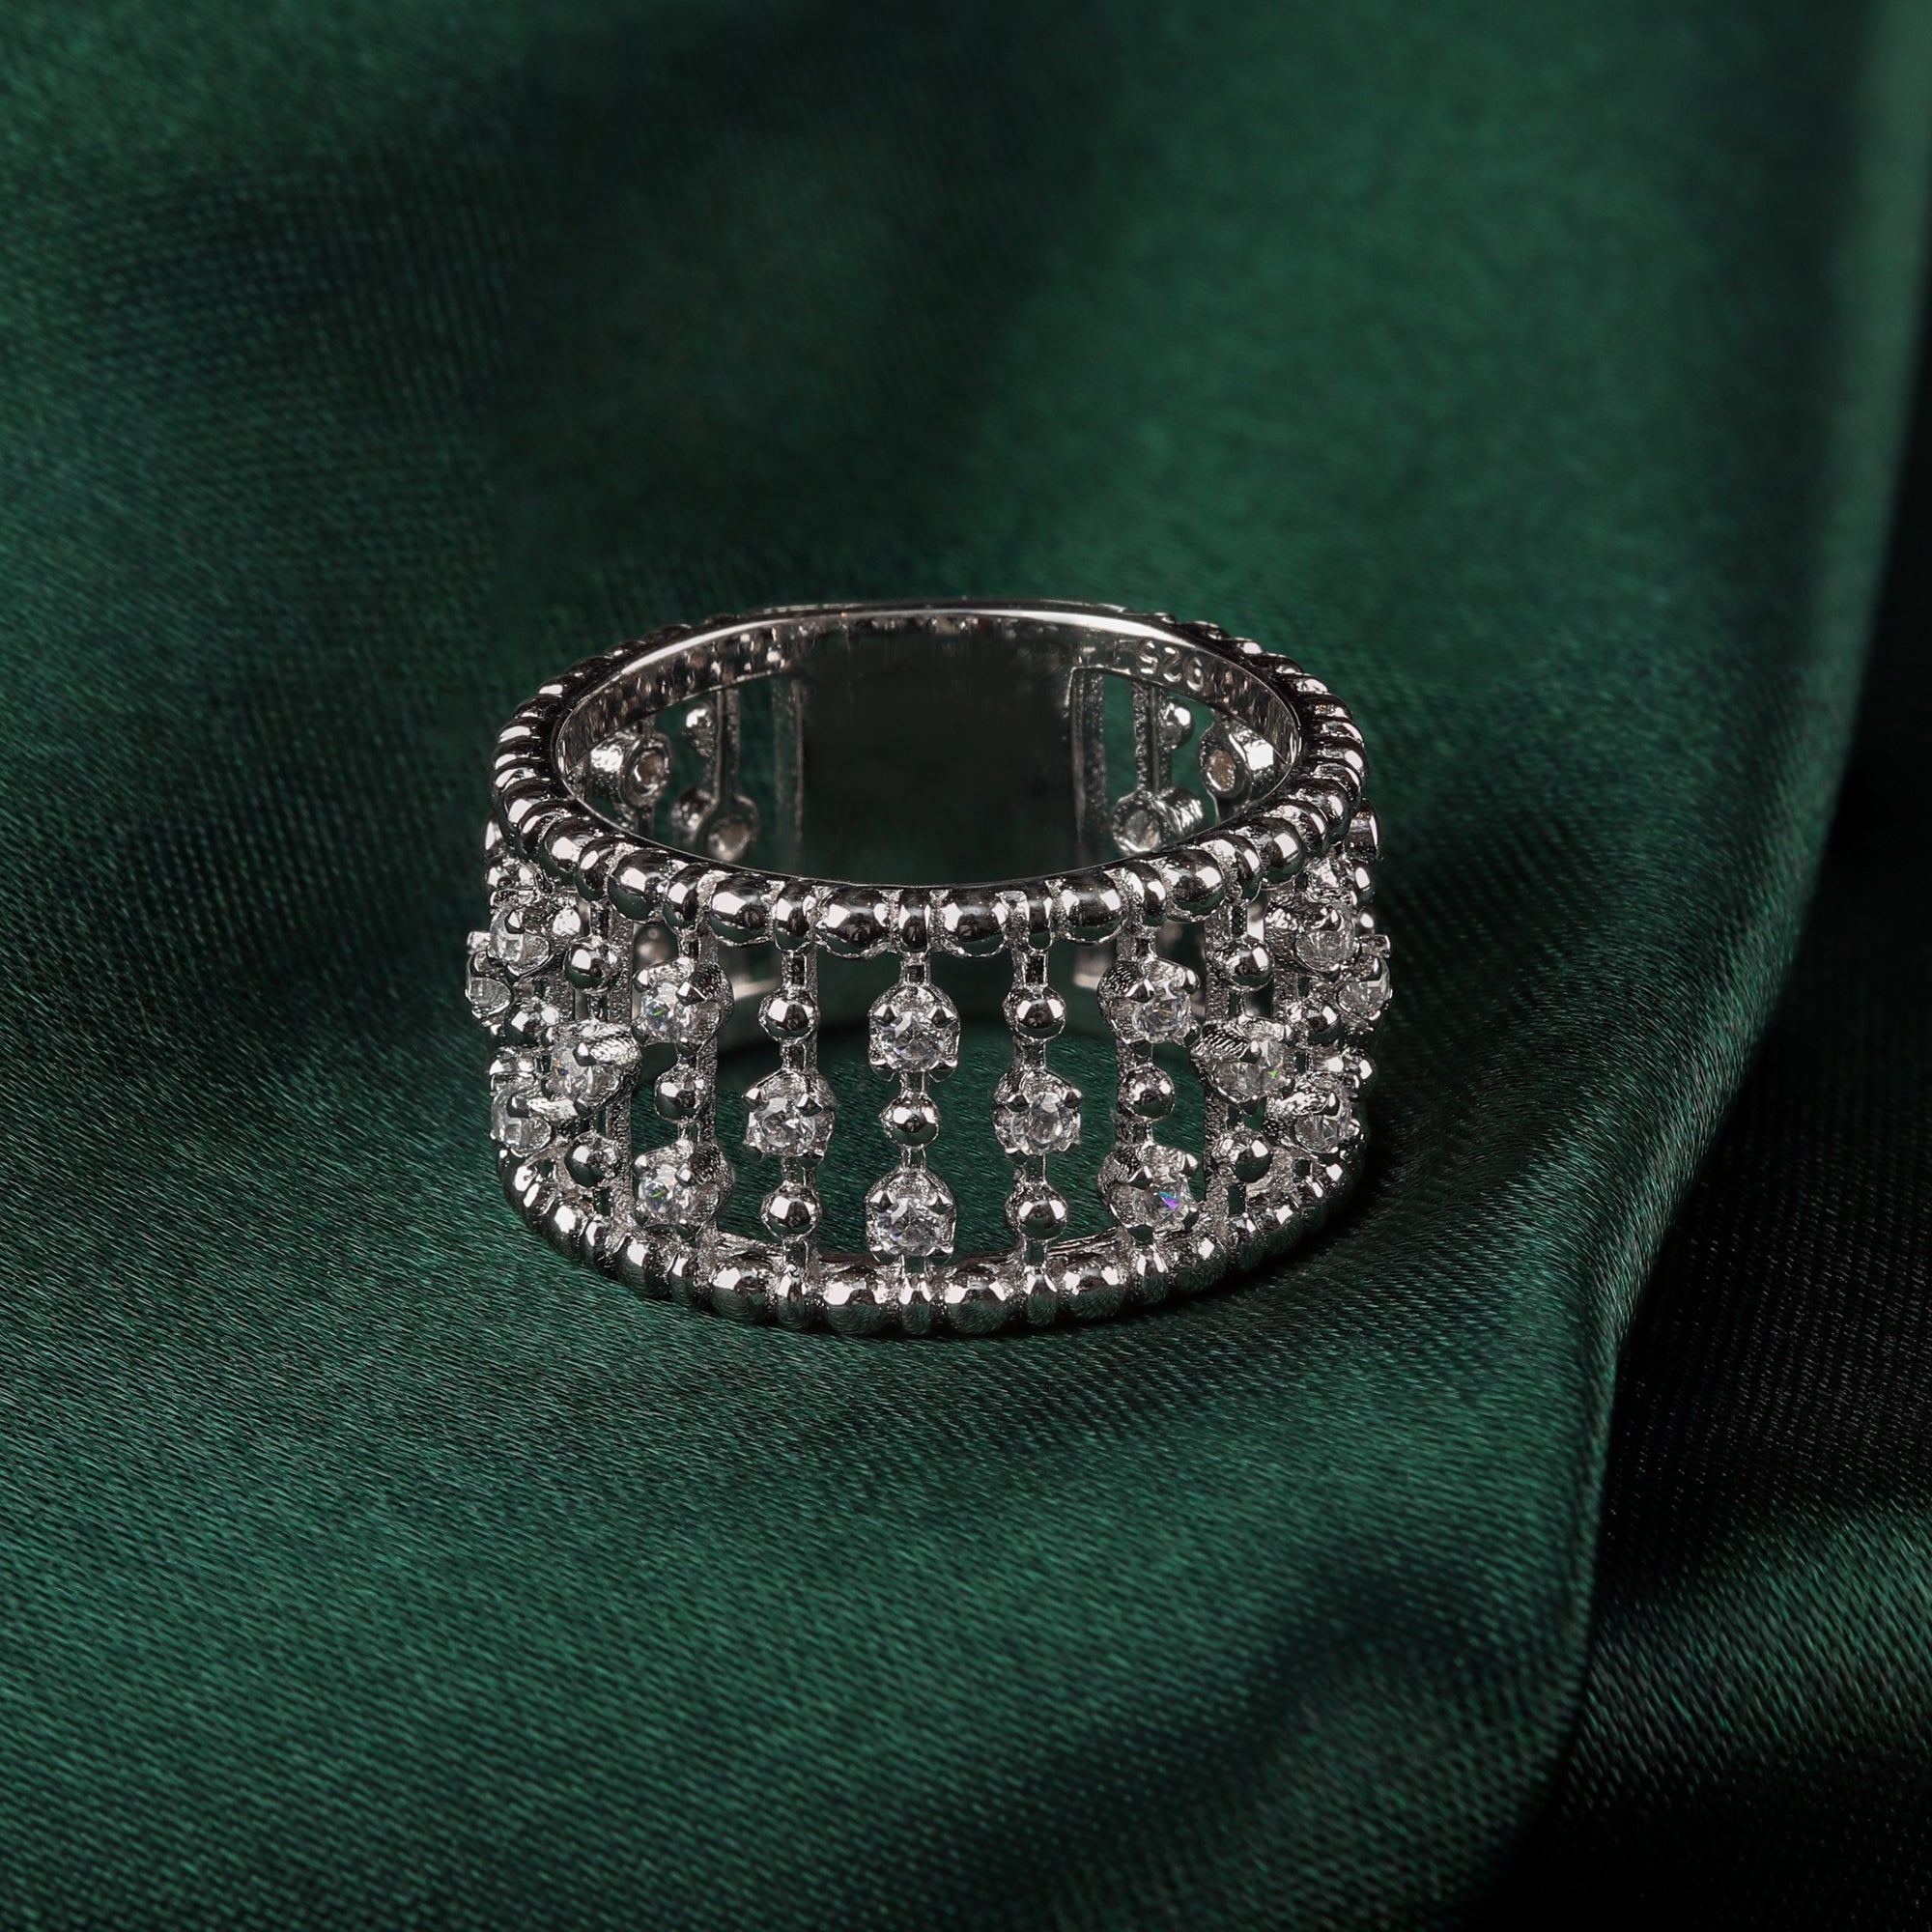 EXQUISITE COCKTAIL RING | SKU :0018687880, 0018687972, 0019281452